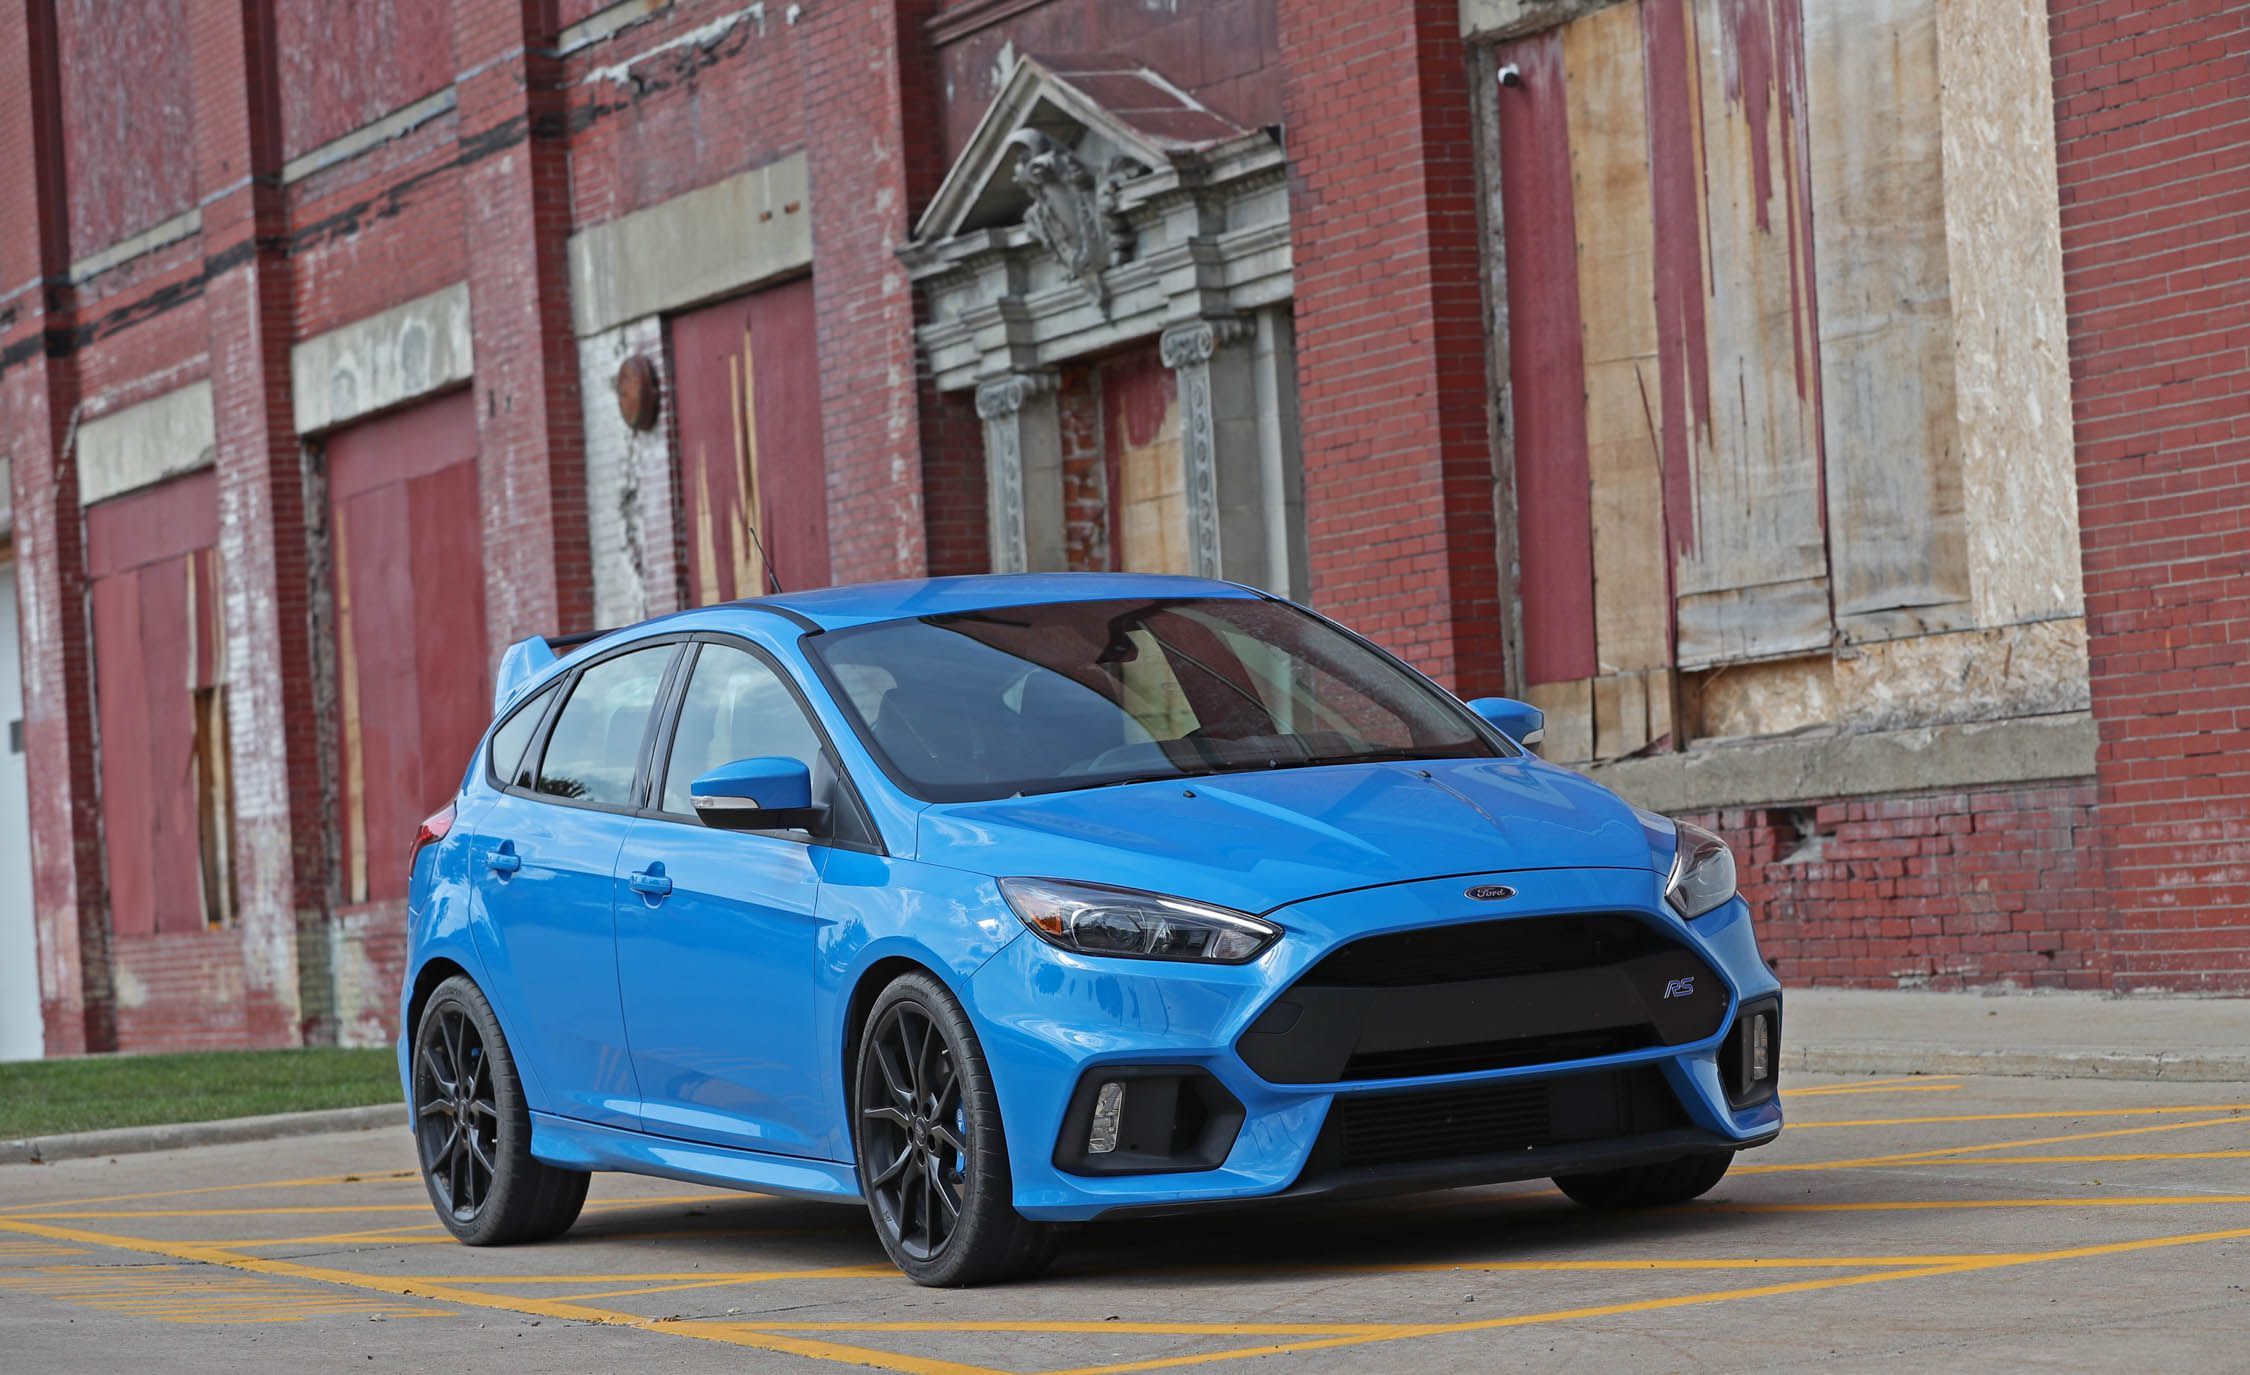  Ford Focus RS  Reviews Ford Focus RS  Price Photos and 